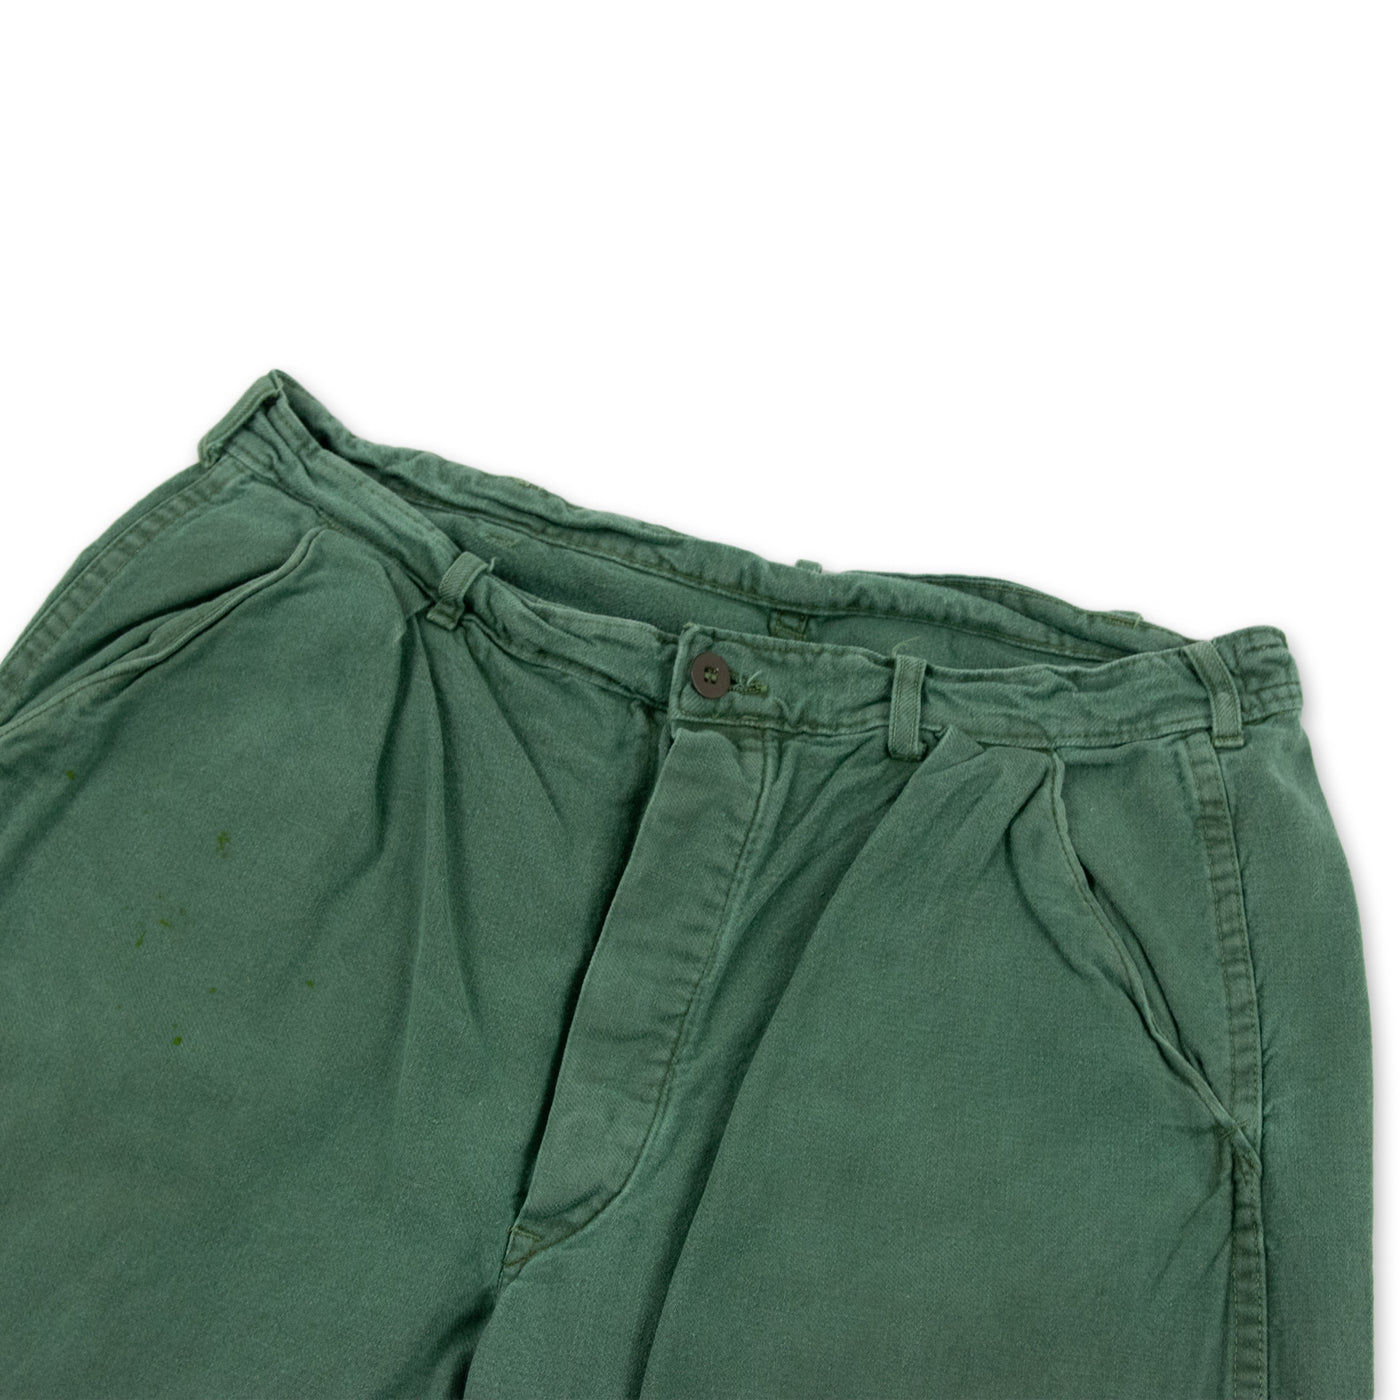 Vintage 70s Swedish Military Field Trousers Worker Style Green 32 W FRONT